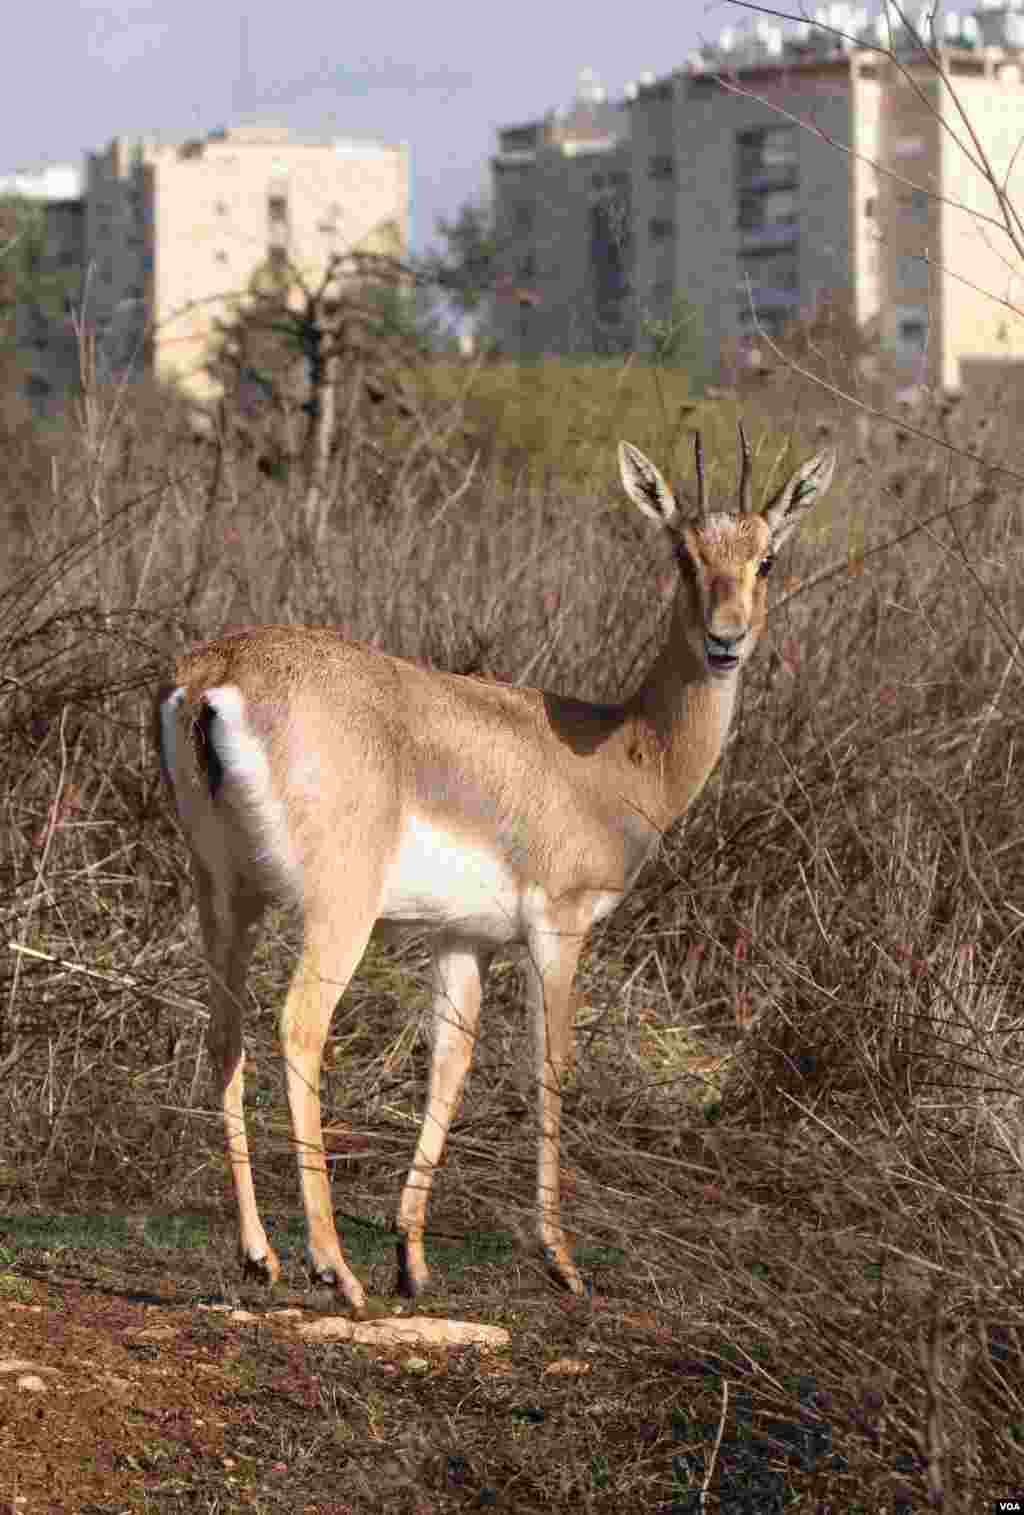 A gazelle seen in Jerusalem&rsquo;s new Gazelle Valley Park, Israel&rsquo;s biggest urban wildlife site, located in between the neighborhoods of Givat Mordechai and Katamon, April 8, 2015. (VOA)